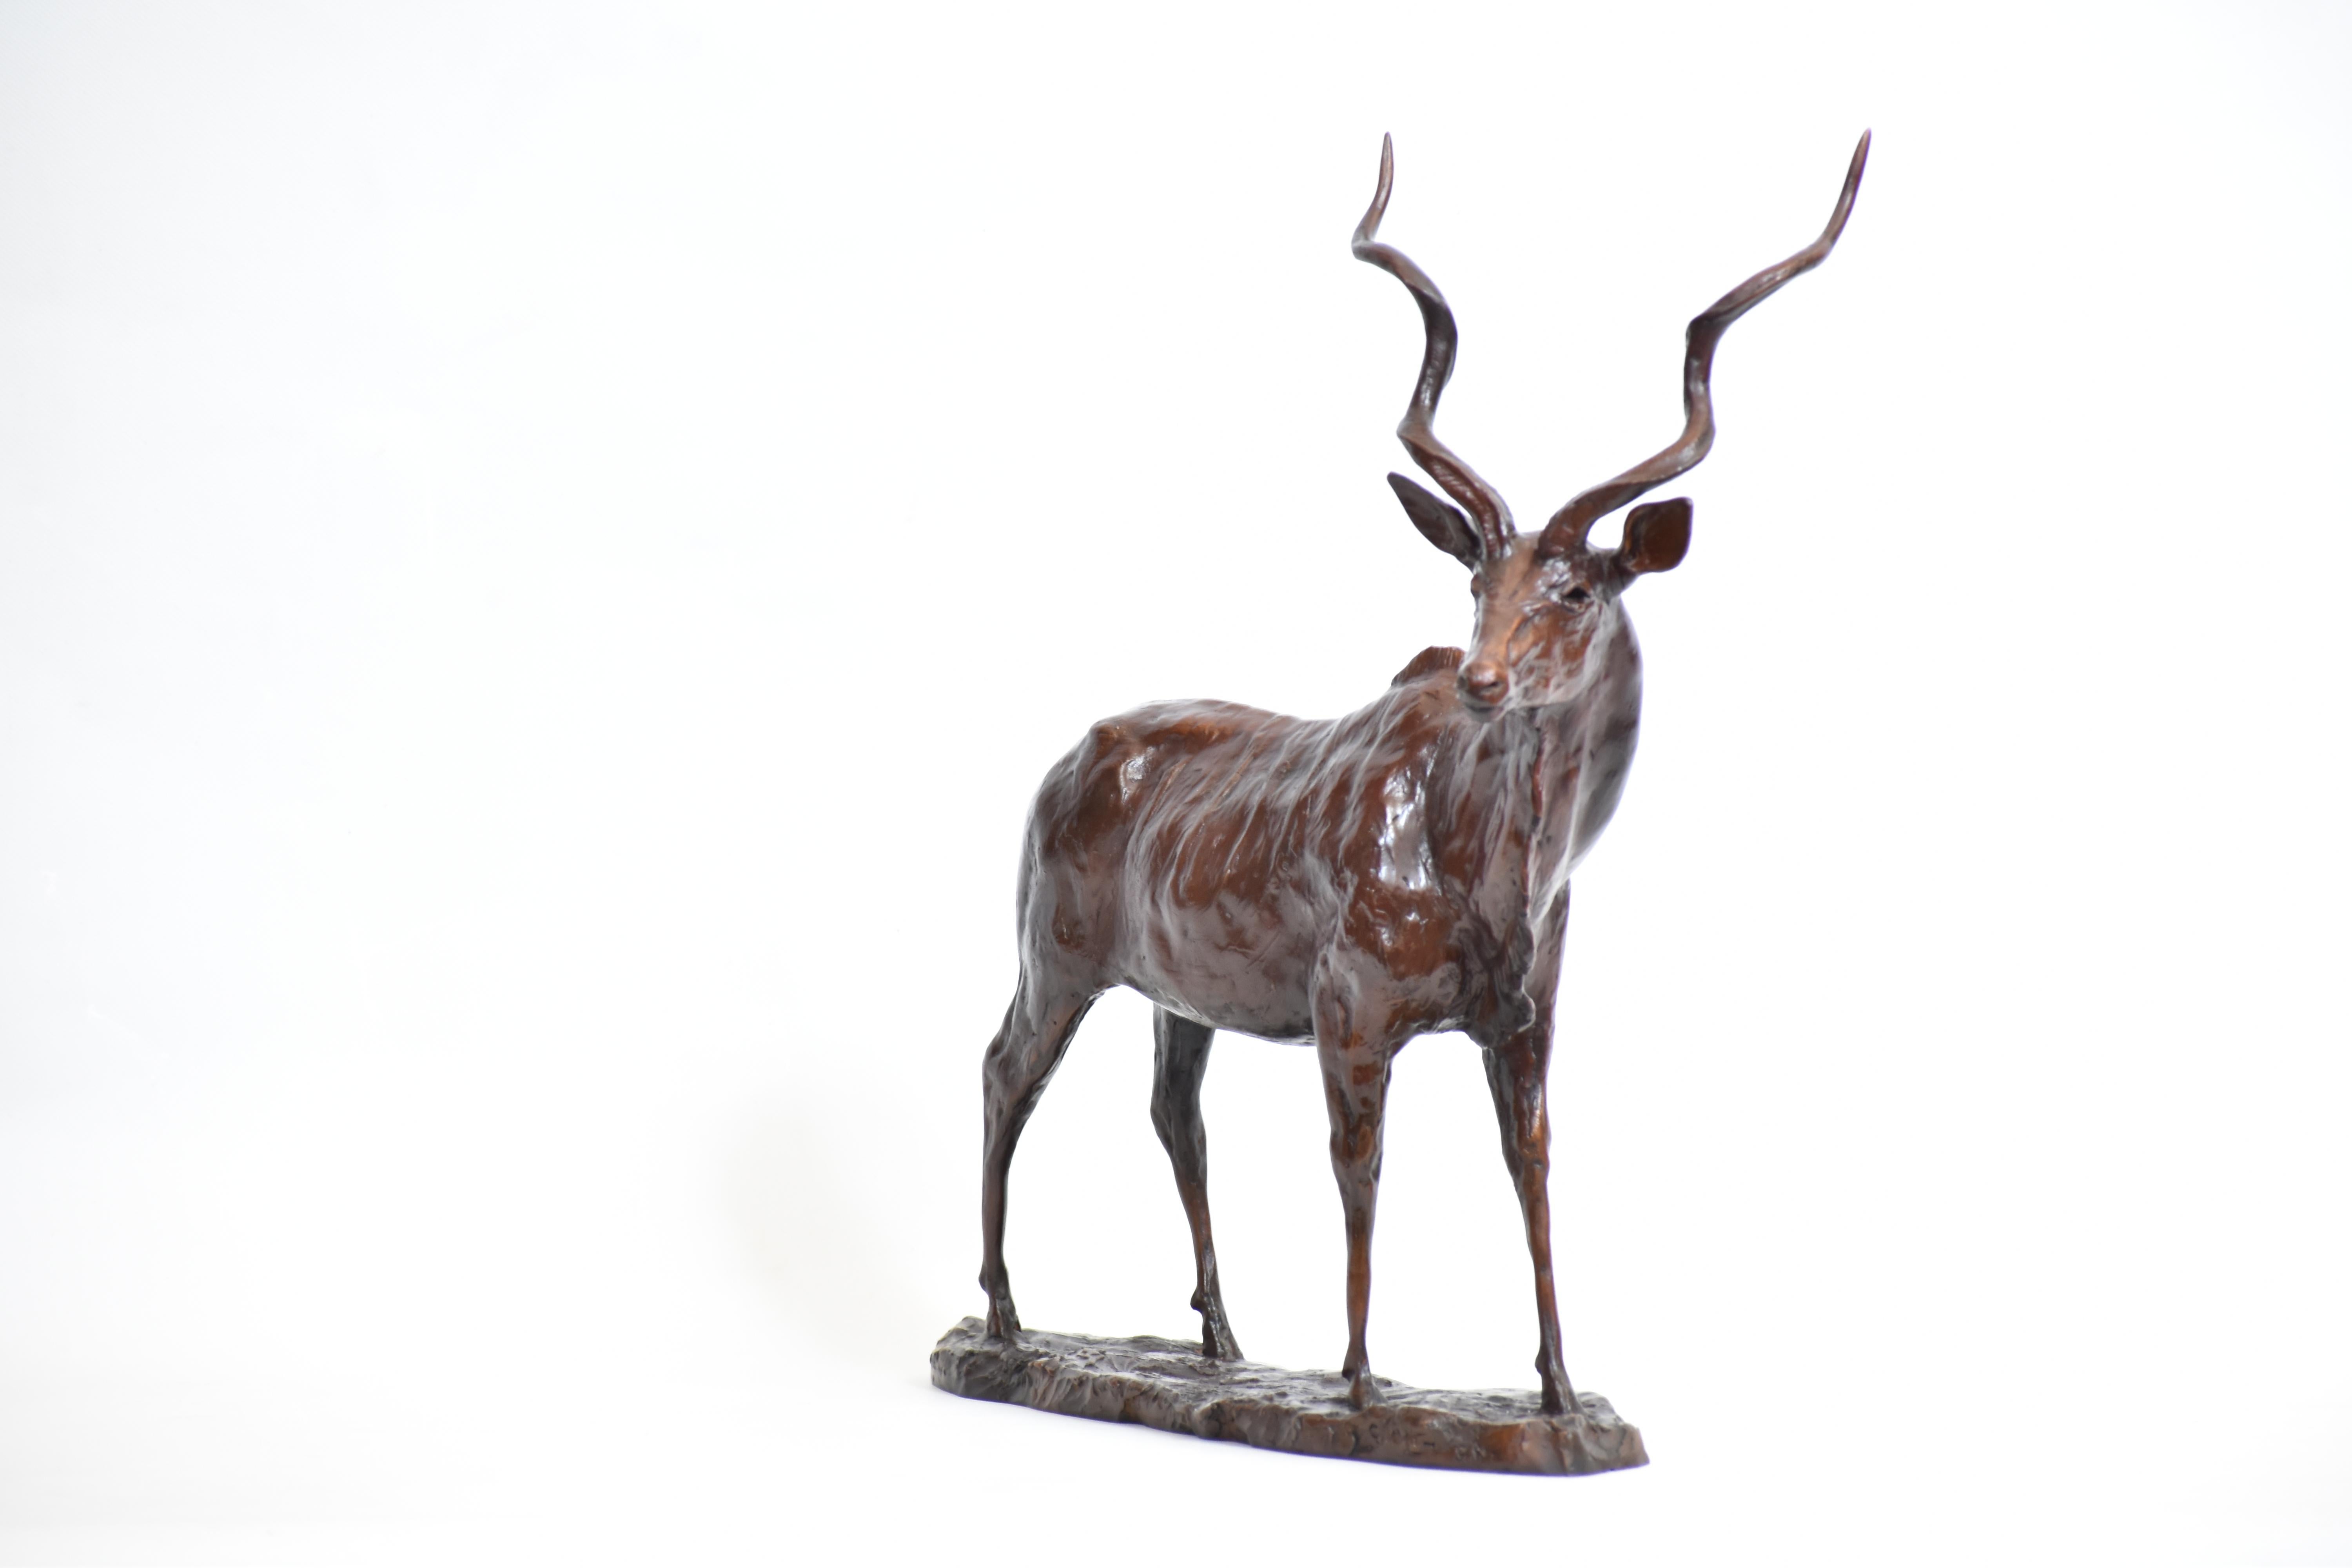 Kudu Bull - Limited Edition of 12, Bronze sculpture on bronze base, L 35 cm x W 12 cm x H 36 cm, brown patina. The majestic Kudu bull has one of the most recognisable silhouettes of the African bush. Tall, corkscrew horns can grow up to 1.8 metres,